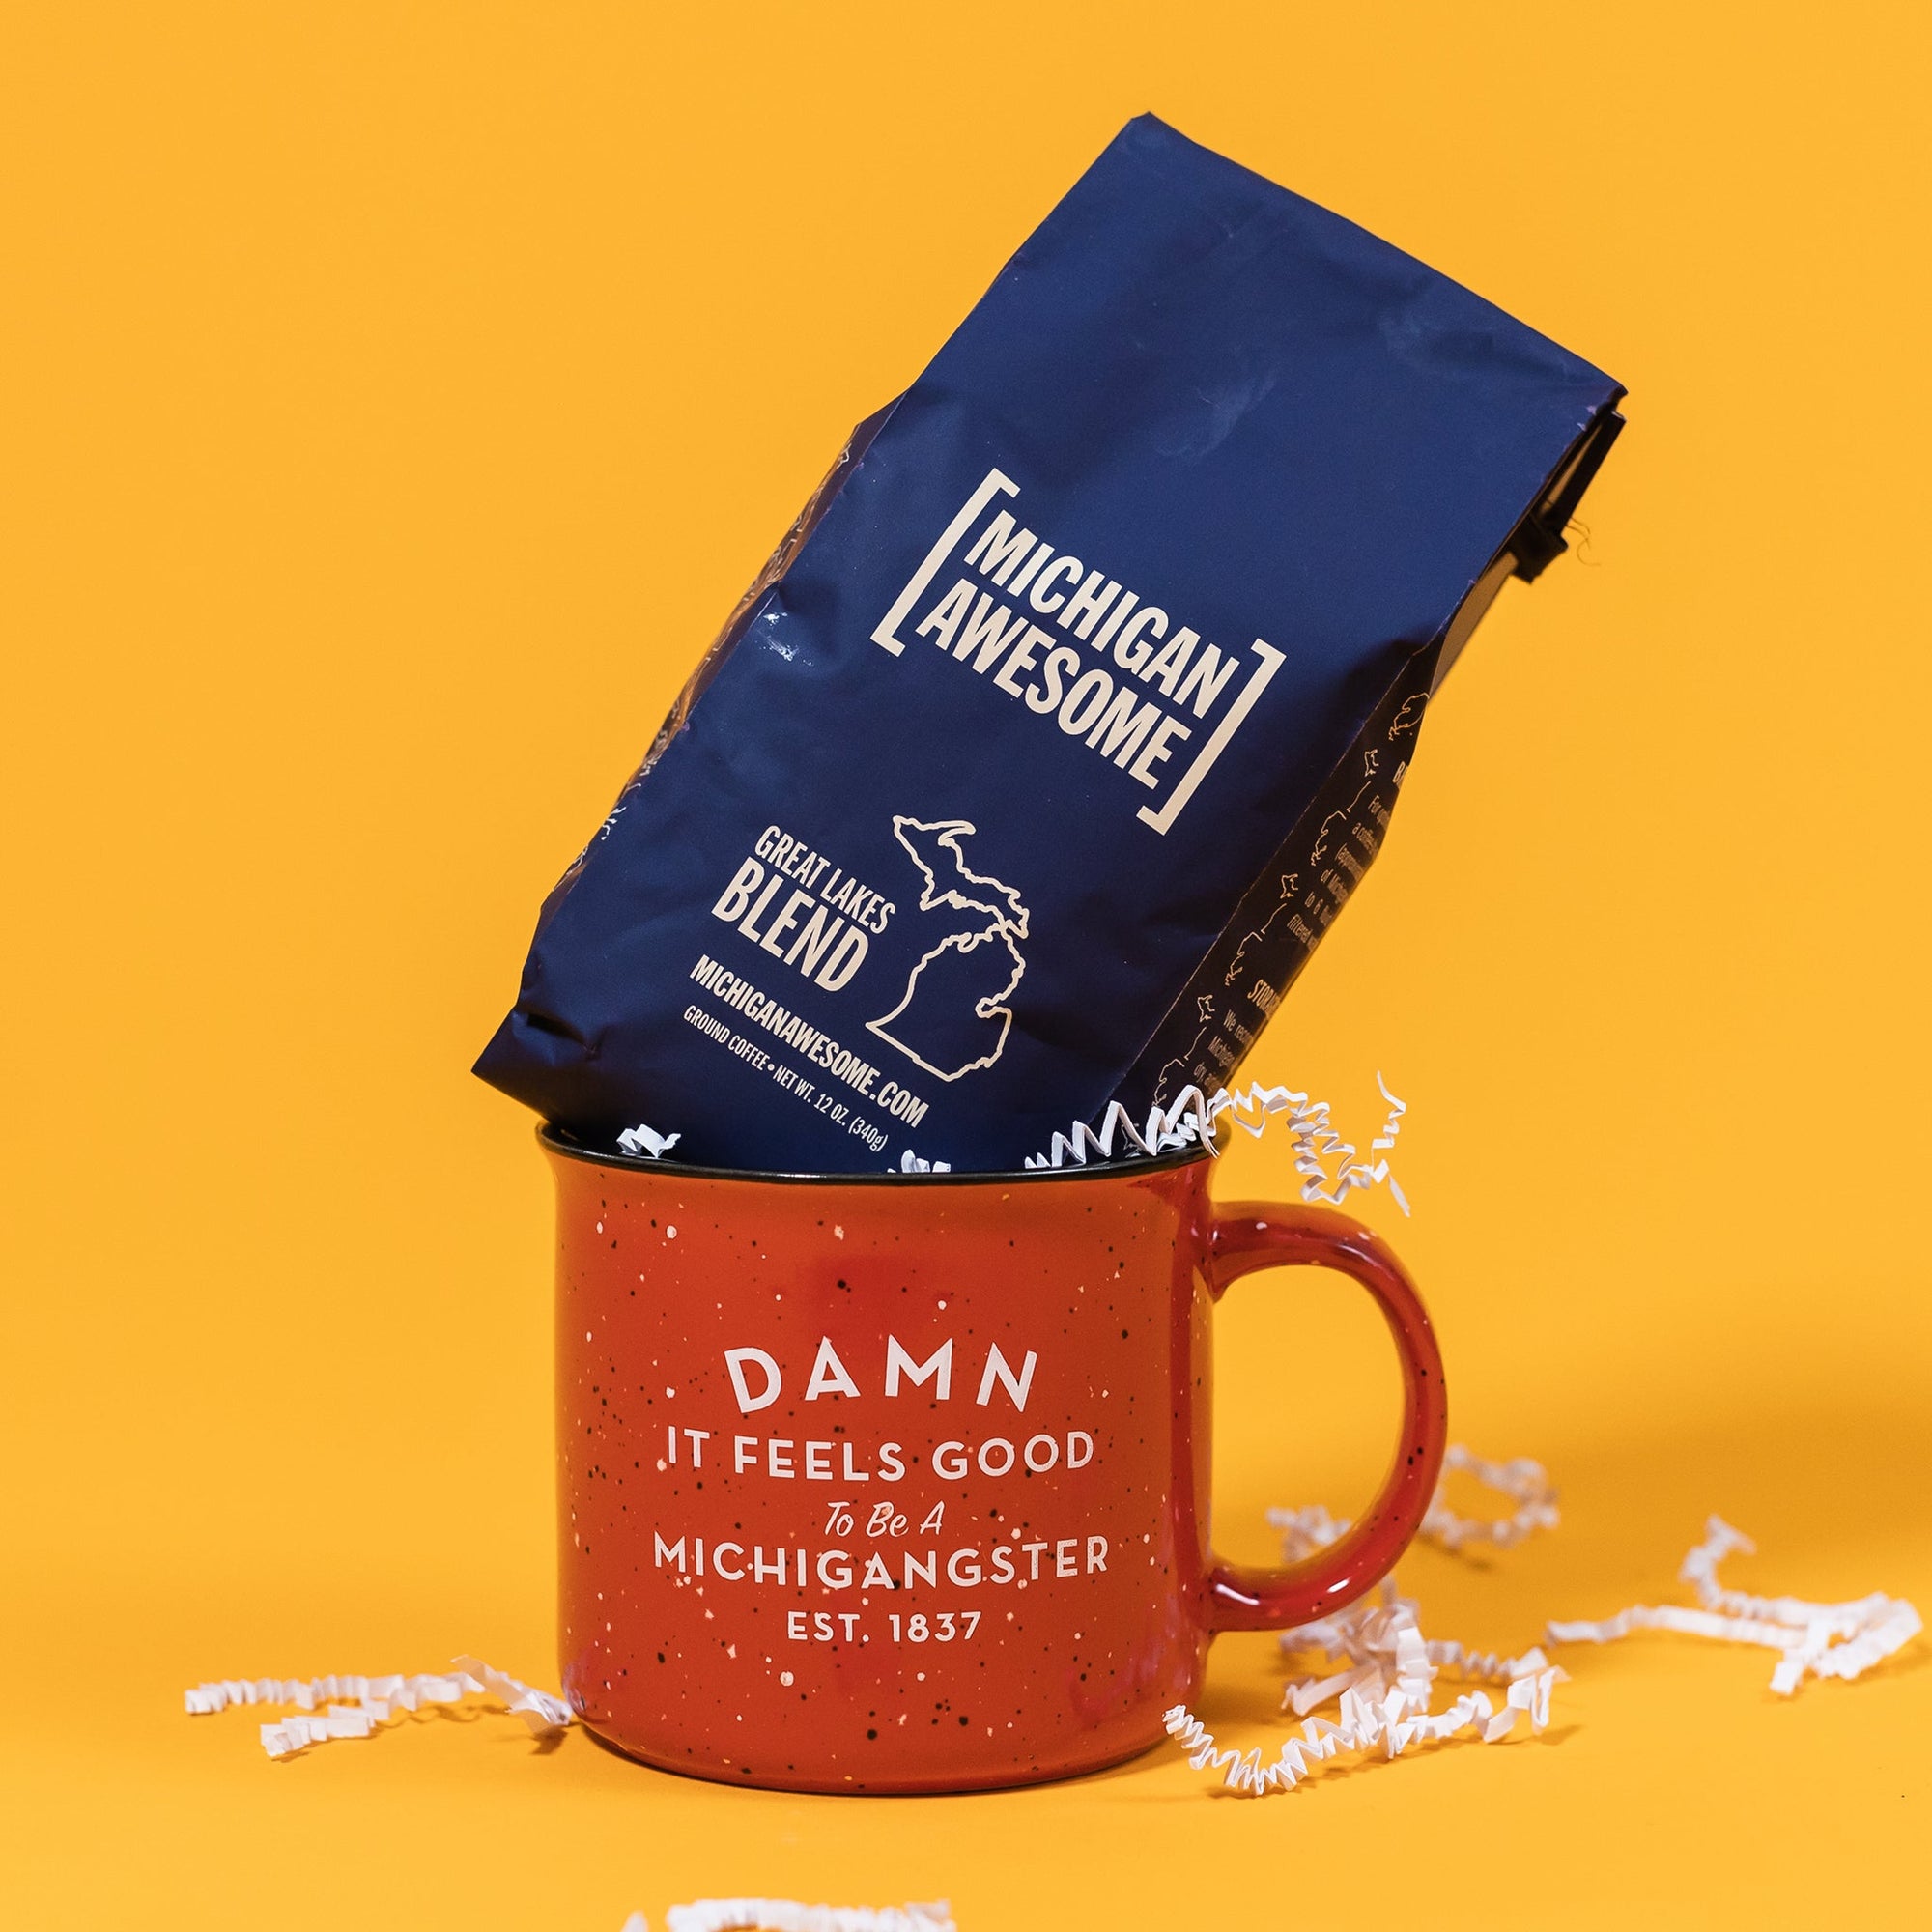 On a sunny mustard background sits a mug and a bag of coffee. The mug is a red campfire style mug with black and white splatter pattern. On the mug is a white block and script font that says "Damn It Feels Good To Be A Michigangster" with "EST. 1837" on the bottom. There is a navy bag of coffee sitting atop the mug. This Michigan Awesome Coffee is a Great Lakes Blend. 12 oz (350g). There is white crinkle scattered around.